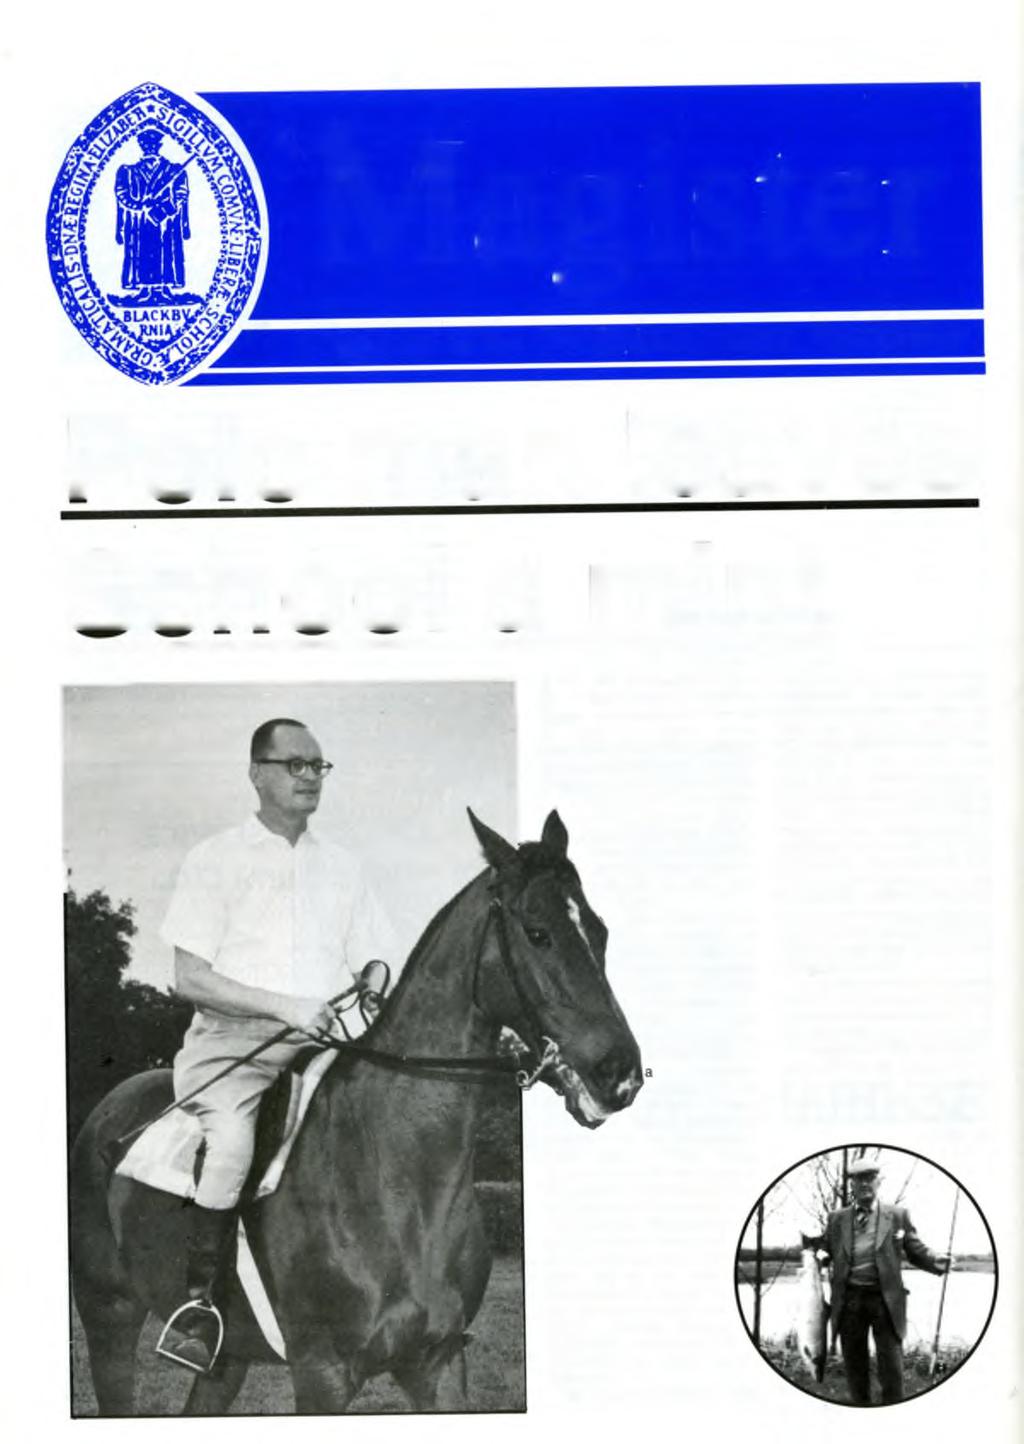 Magister Journal of the Old Blackburnians Association Polo man leaves School a mint E r ic c o r l e s s (1925-30) left over 250 000 to the School in his will.